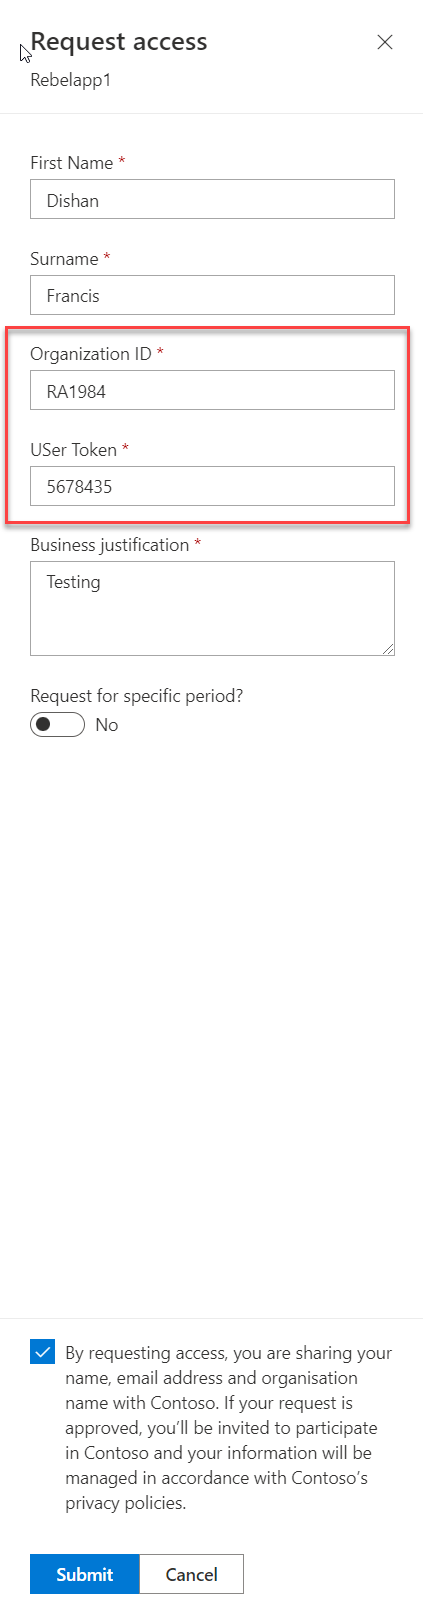 Completed access form